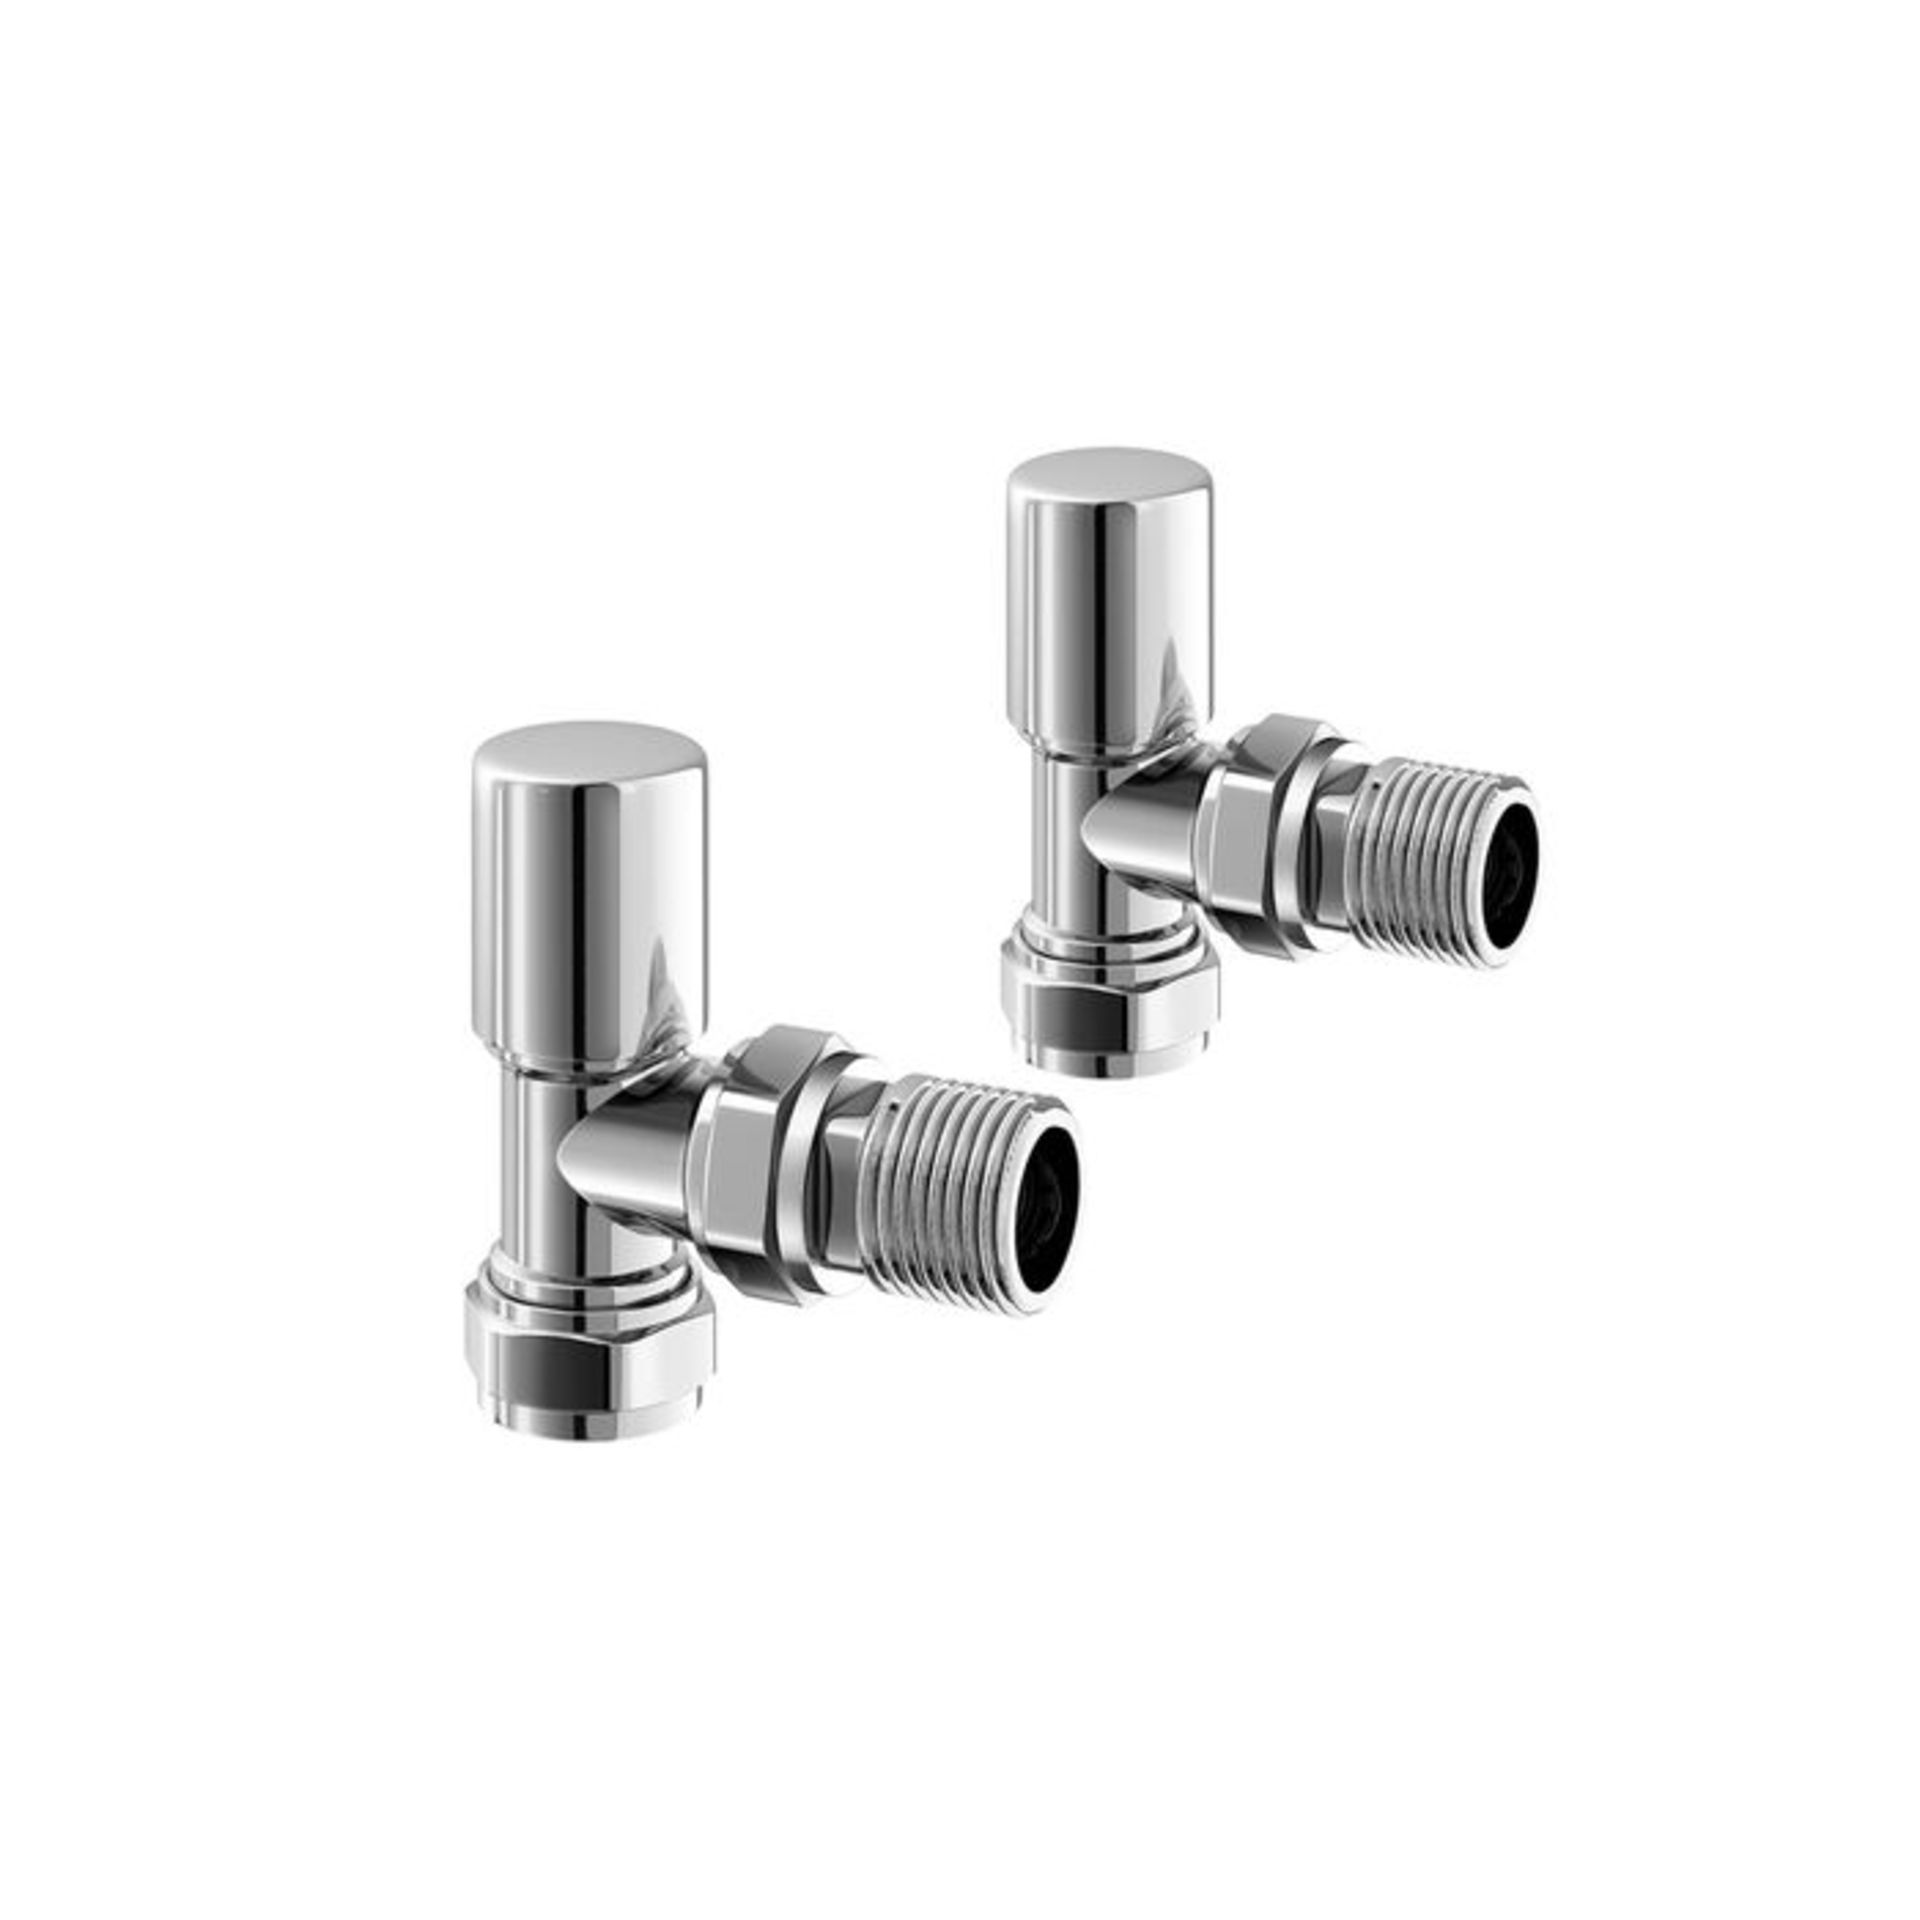 (SU1031) Standard 15mm Connection Angled Chrome Radiator Valves Chrome Plated Solid Brass Ang... - Image 2 of 3